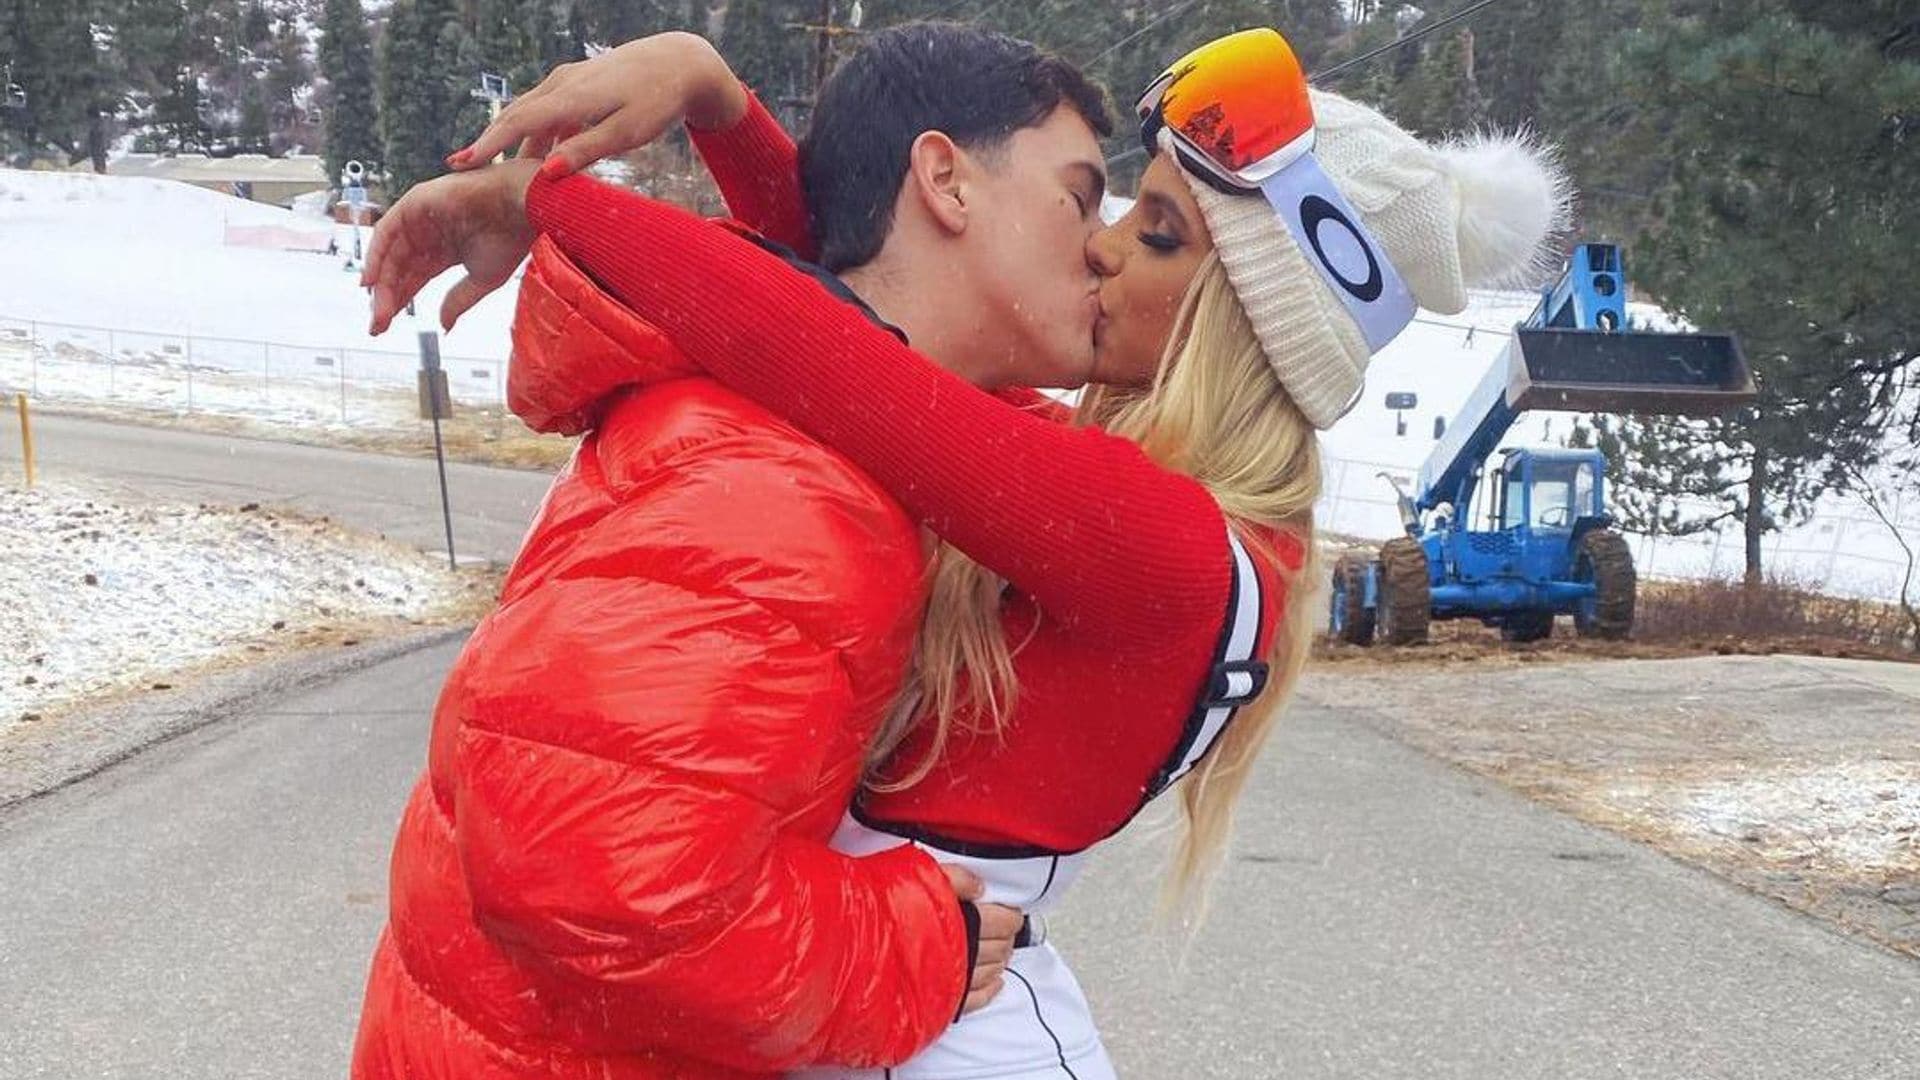 Lele Pons and Guaynaa are officially dating: ‘I love you!’